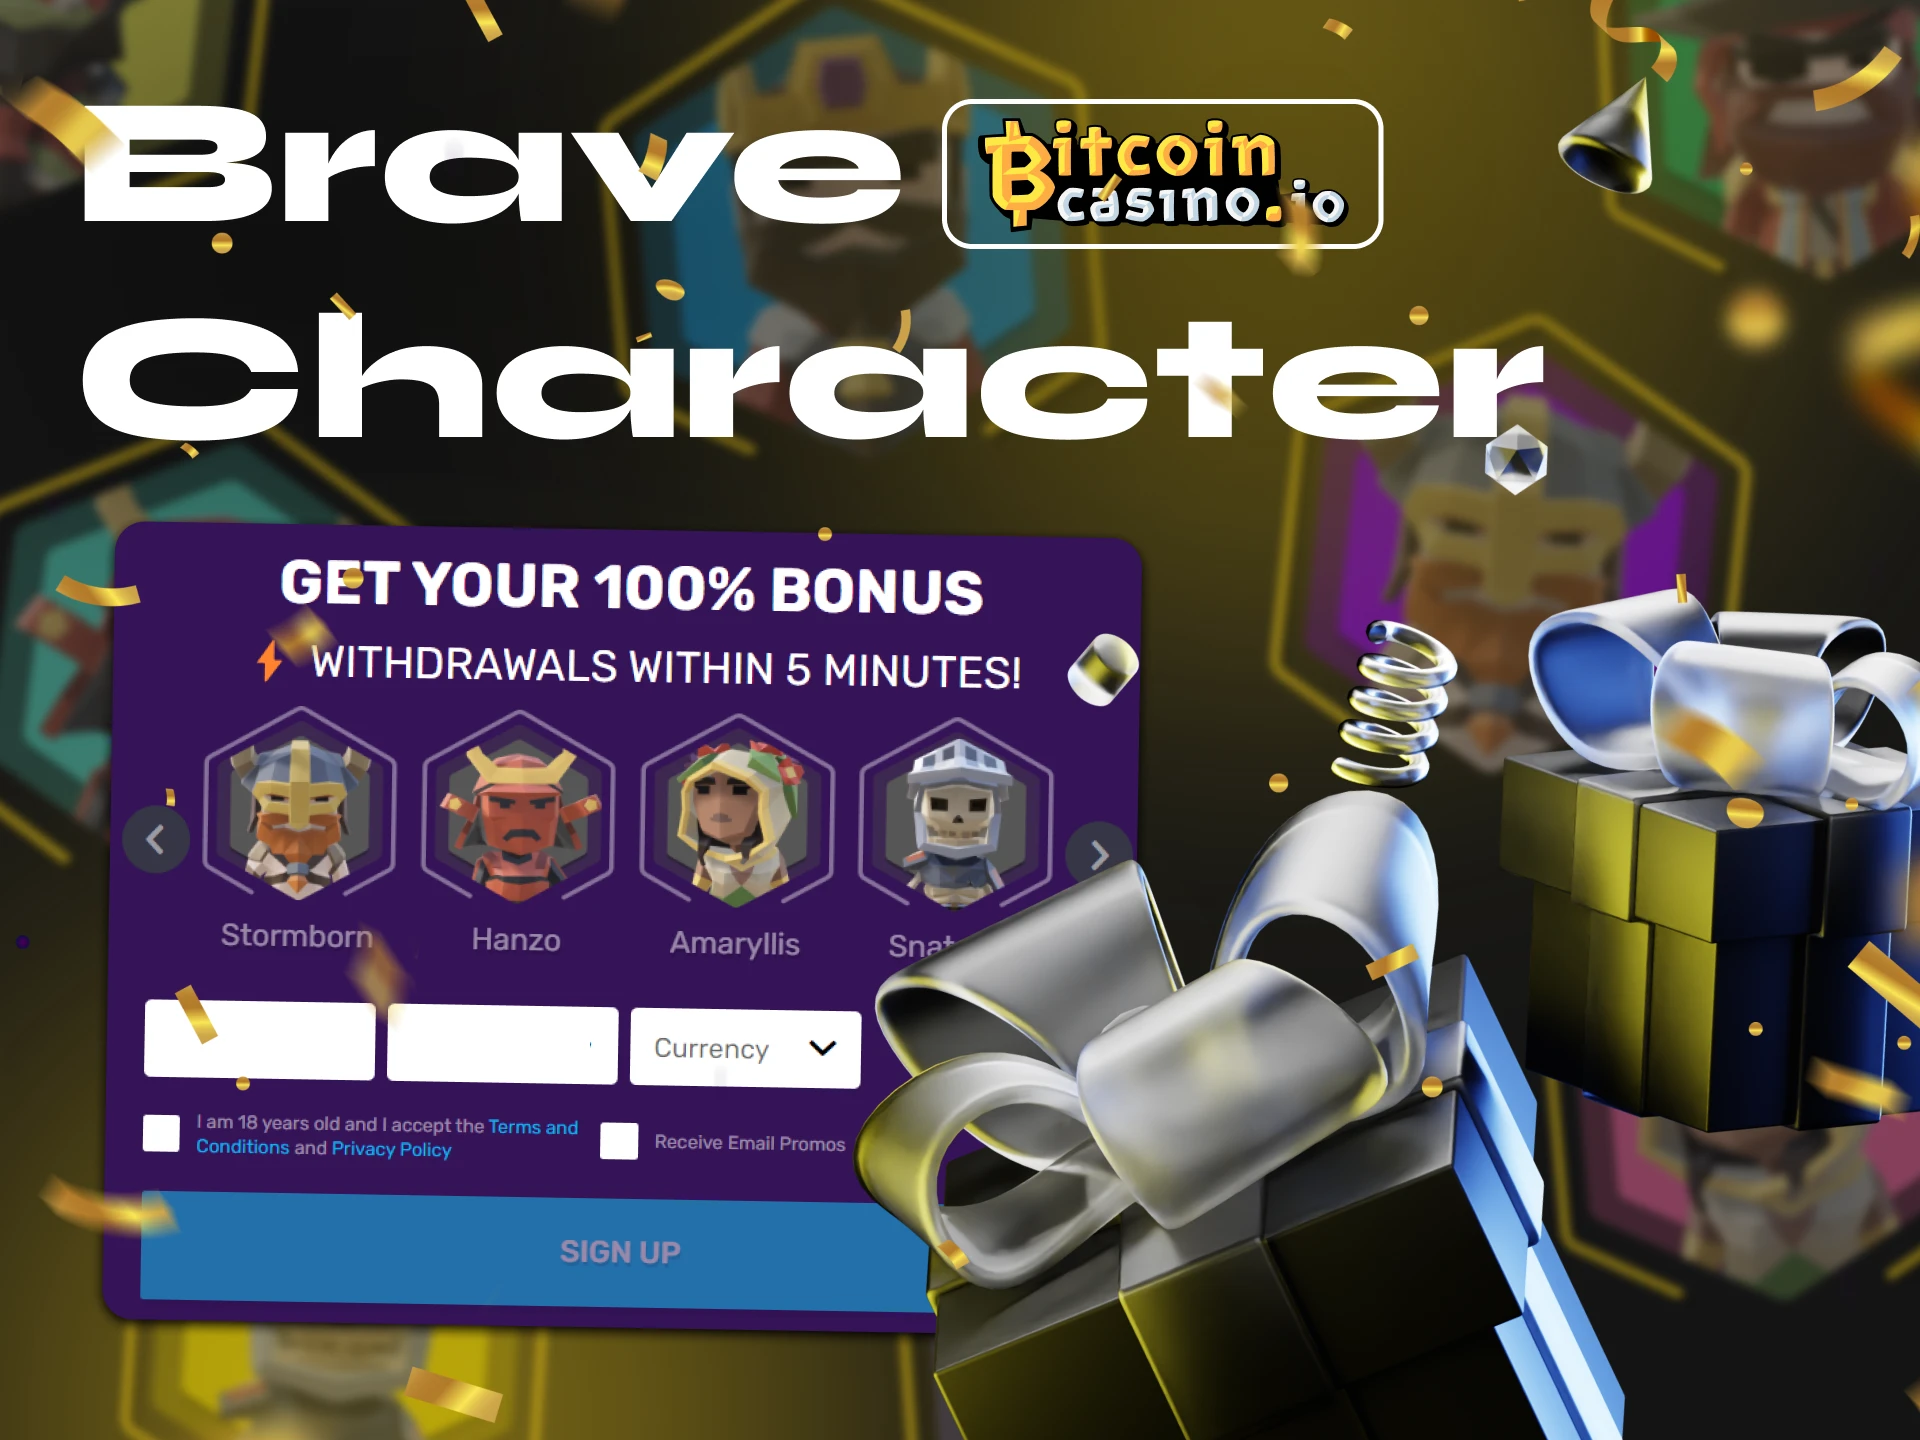 At Bitcoincasino, before registering, select your favorite character and receive a special bonus.